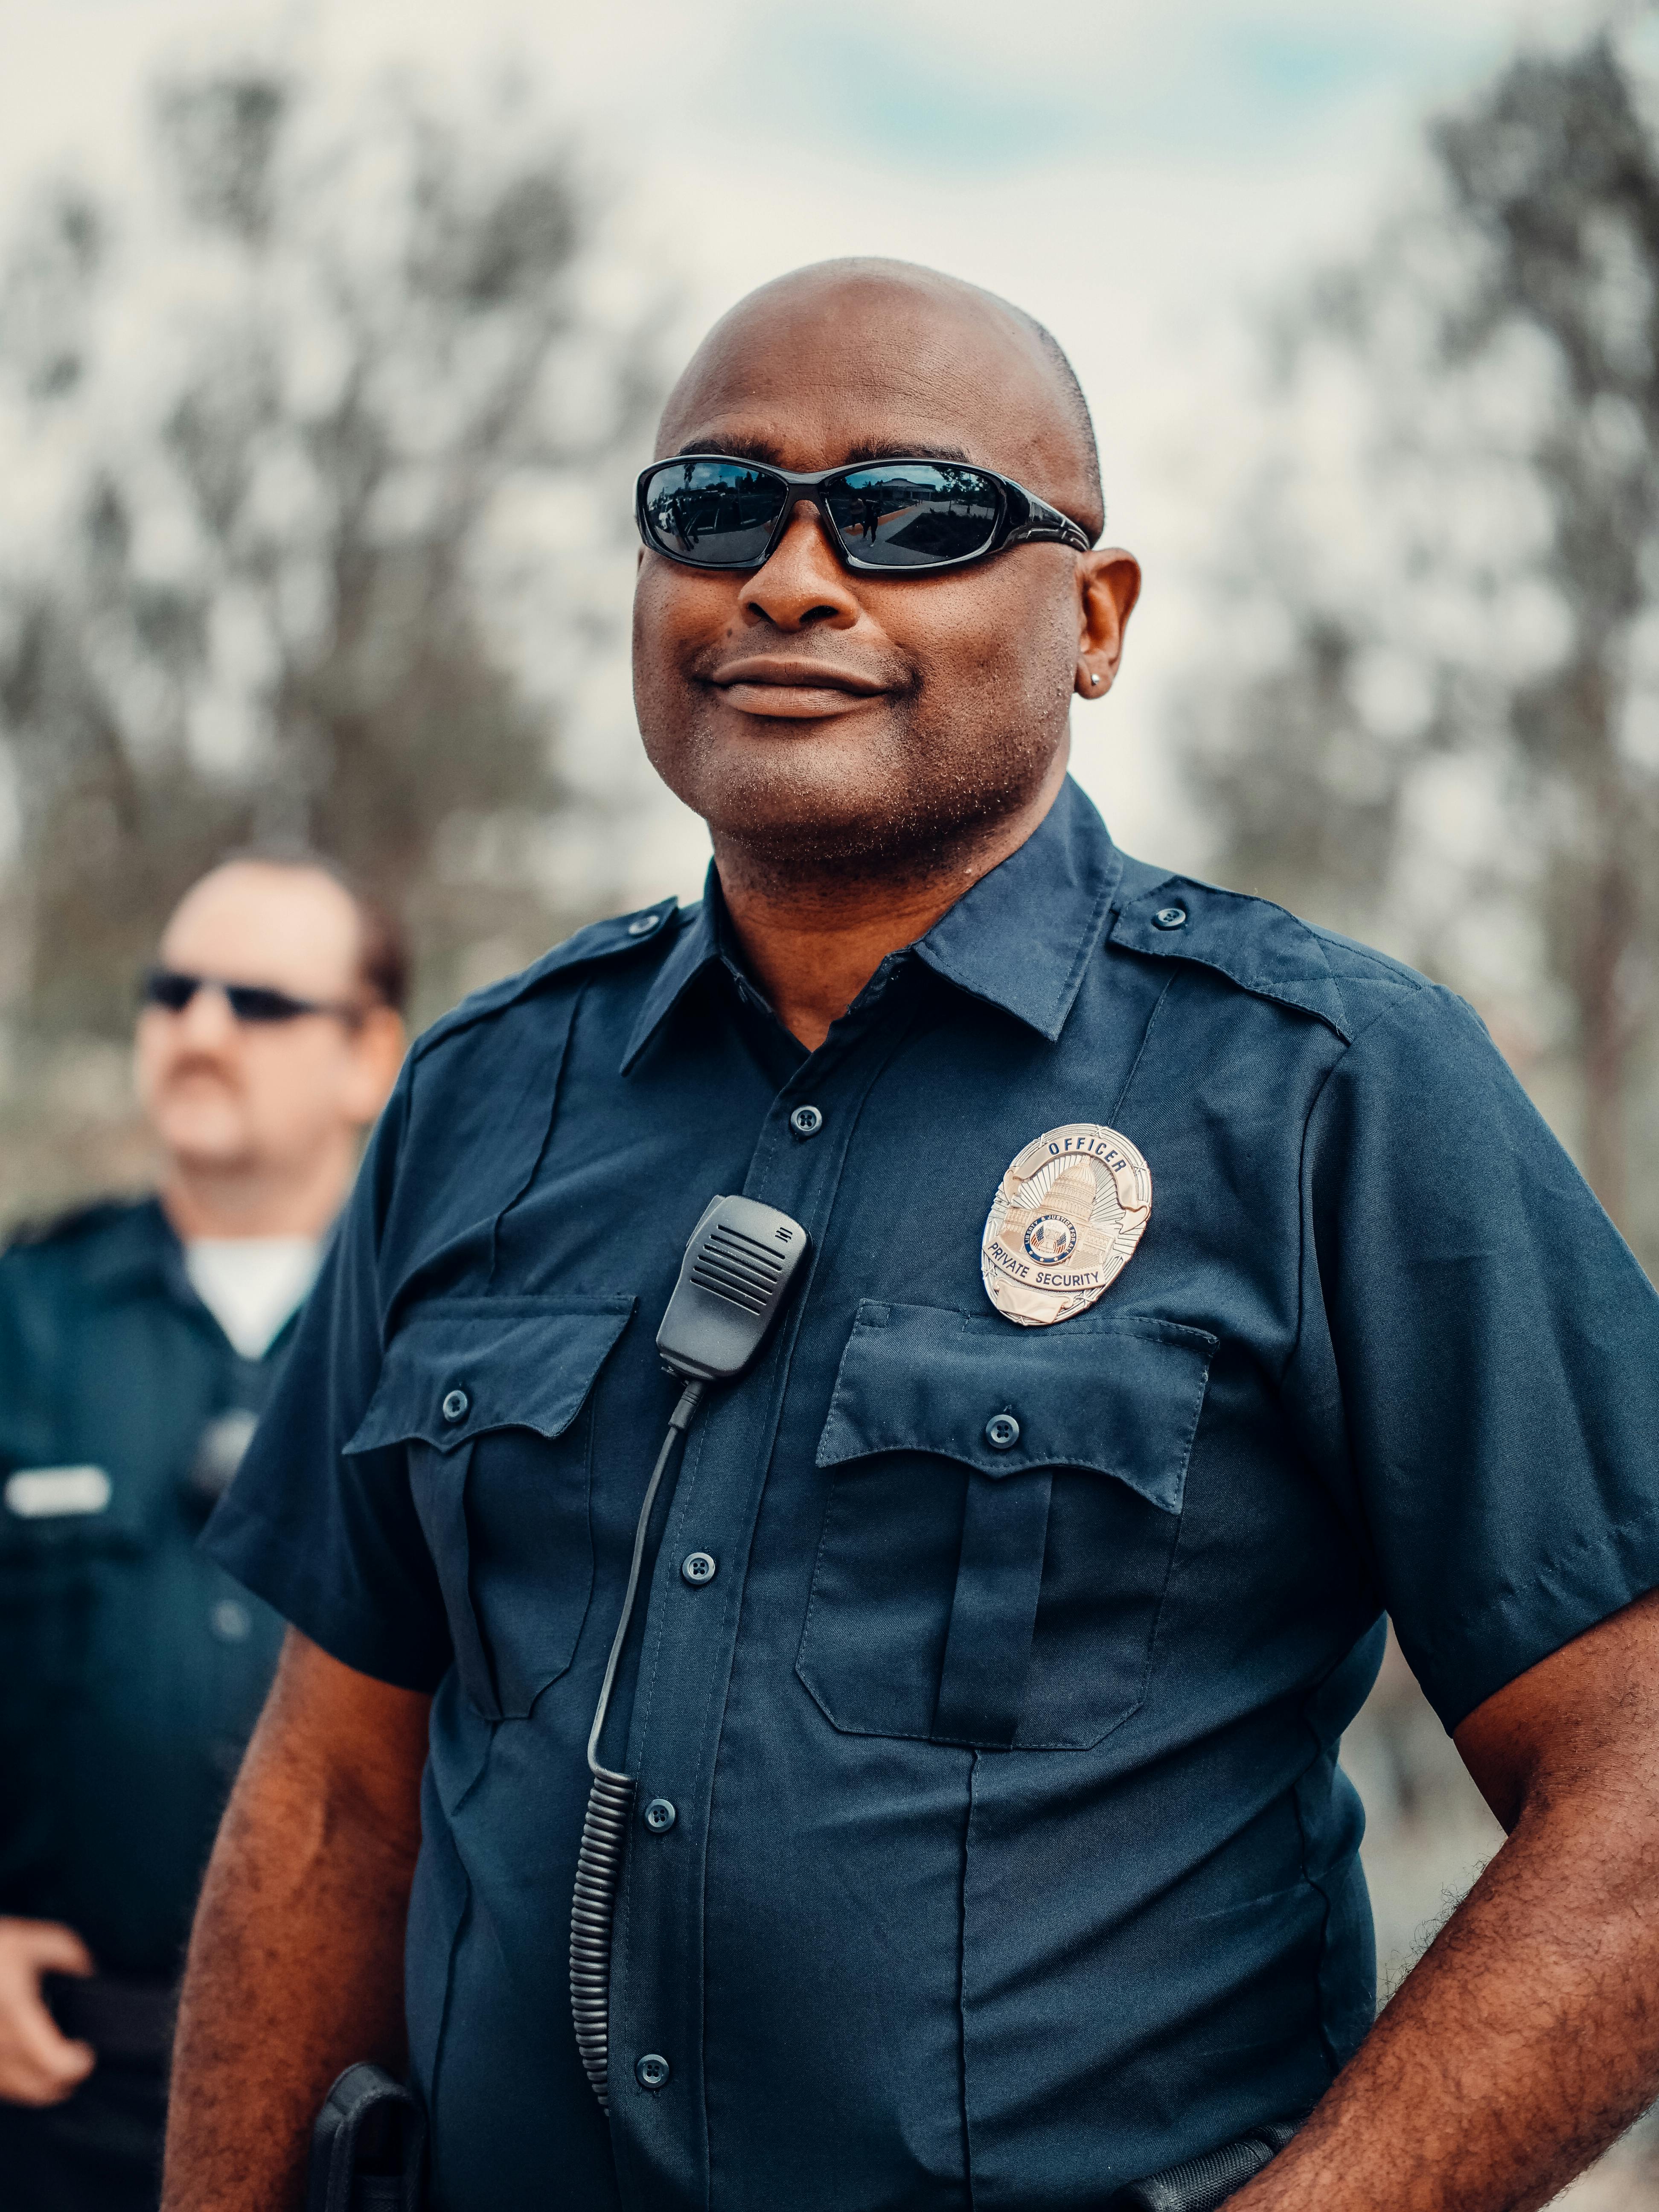 A police officer | Source: Pexels